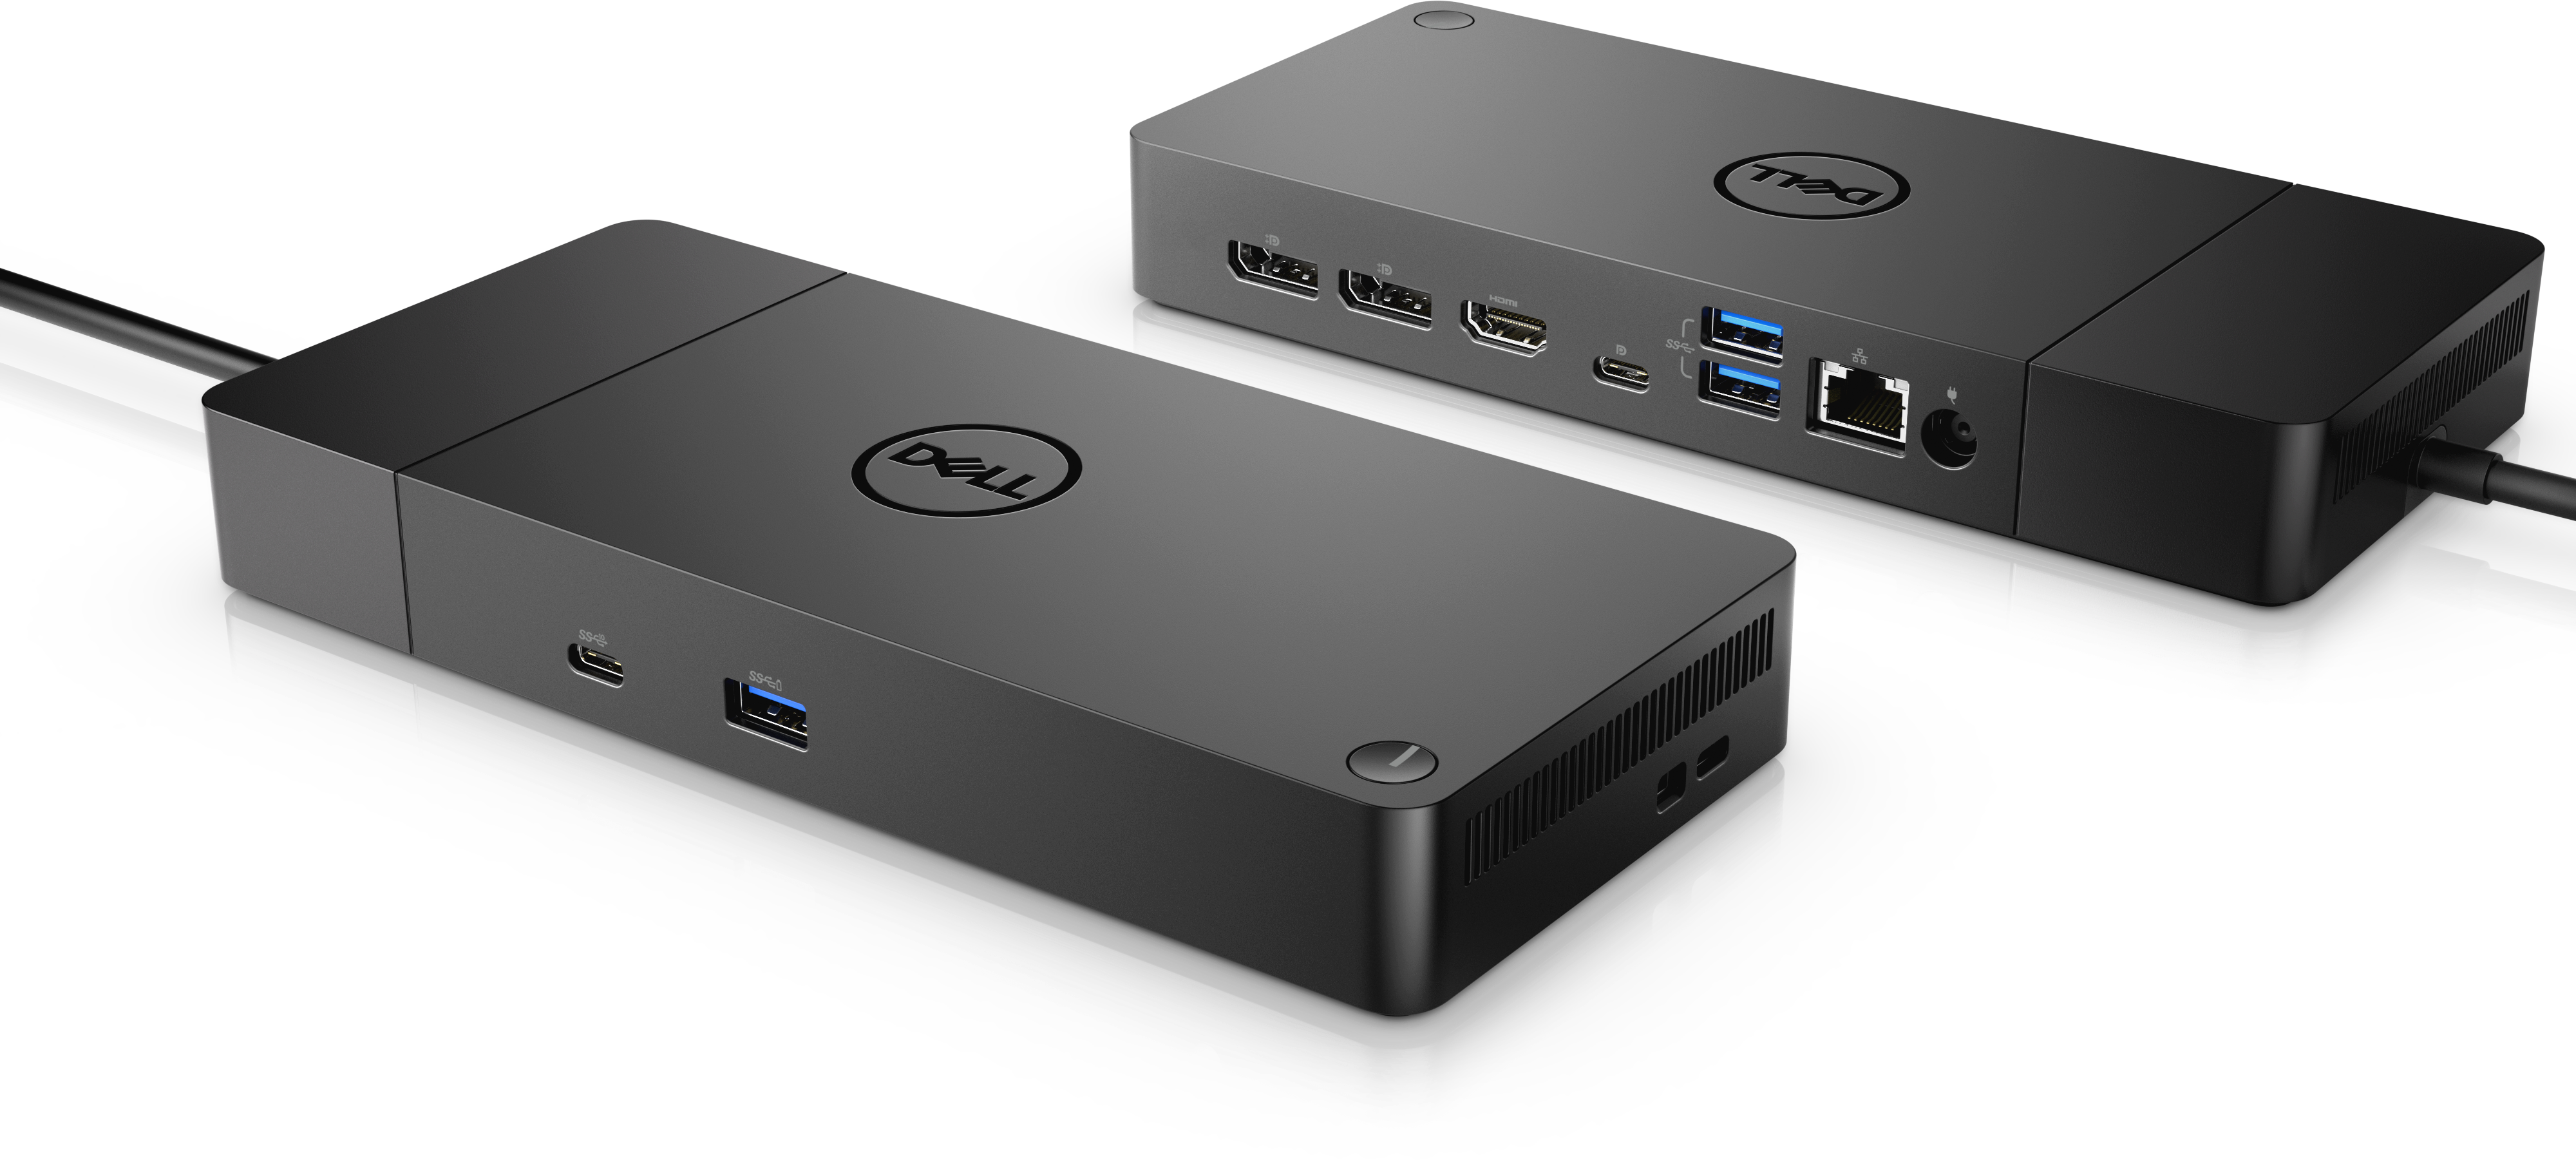 https://i.dell.com/is/image/DellContent//content/dam/images/products/electronics-and-accessories/dell/docks-and-stands/wd19s-130w/wd19s-130w-gnb-shot04-bk-singleusbc.psd?fmt=png-alpha&pscan=auto&scl=1&wid=4000&hei=1801&qlt=100,1&resMode=sharp2&size=4000,1801&chrss=full&imwidth=5000